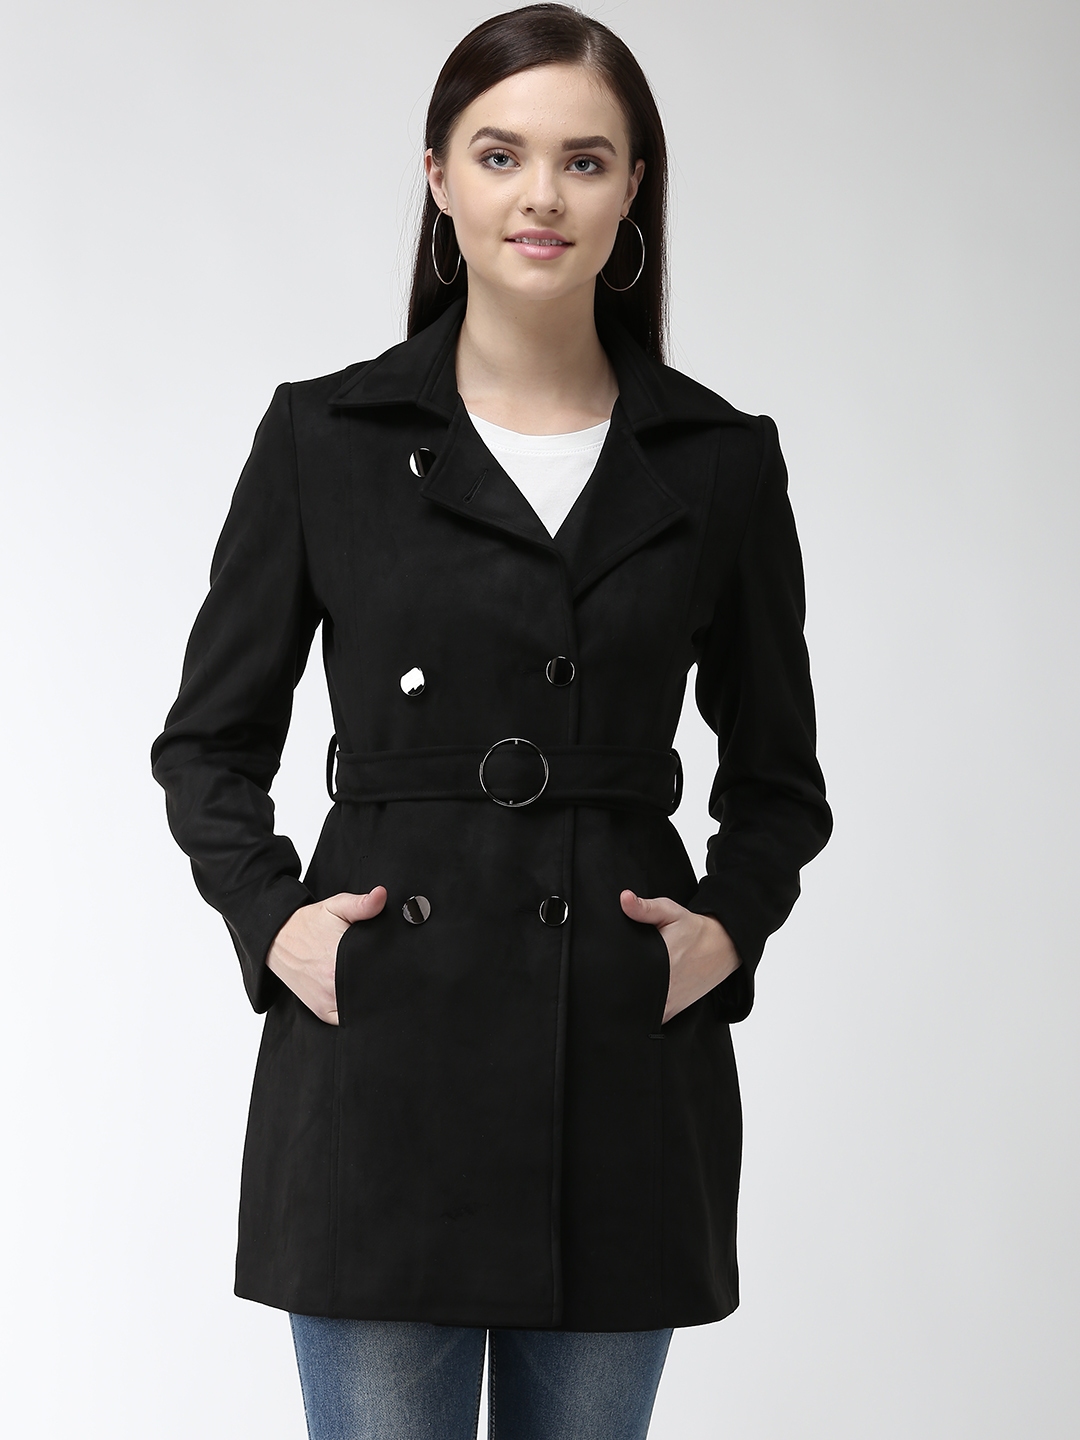 HLCC Peacoat Womens Coat, Fashion Office Ladies Outwear Loose